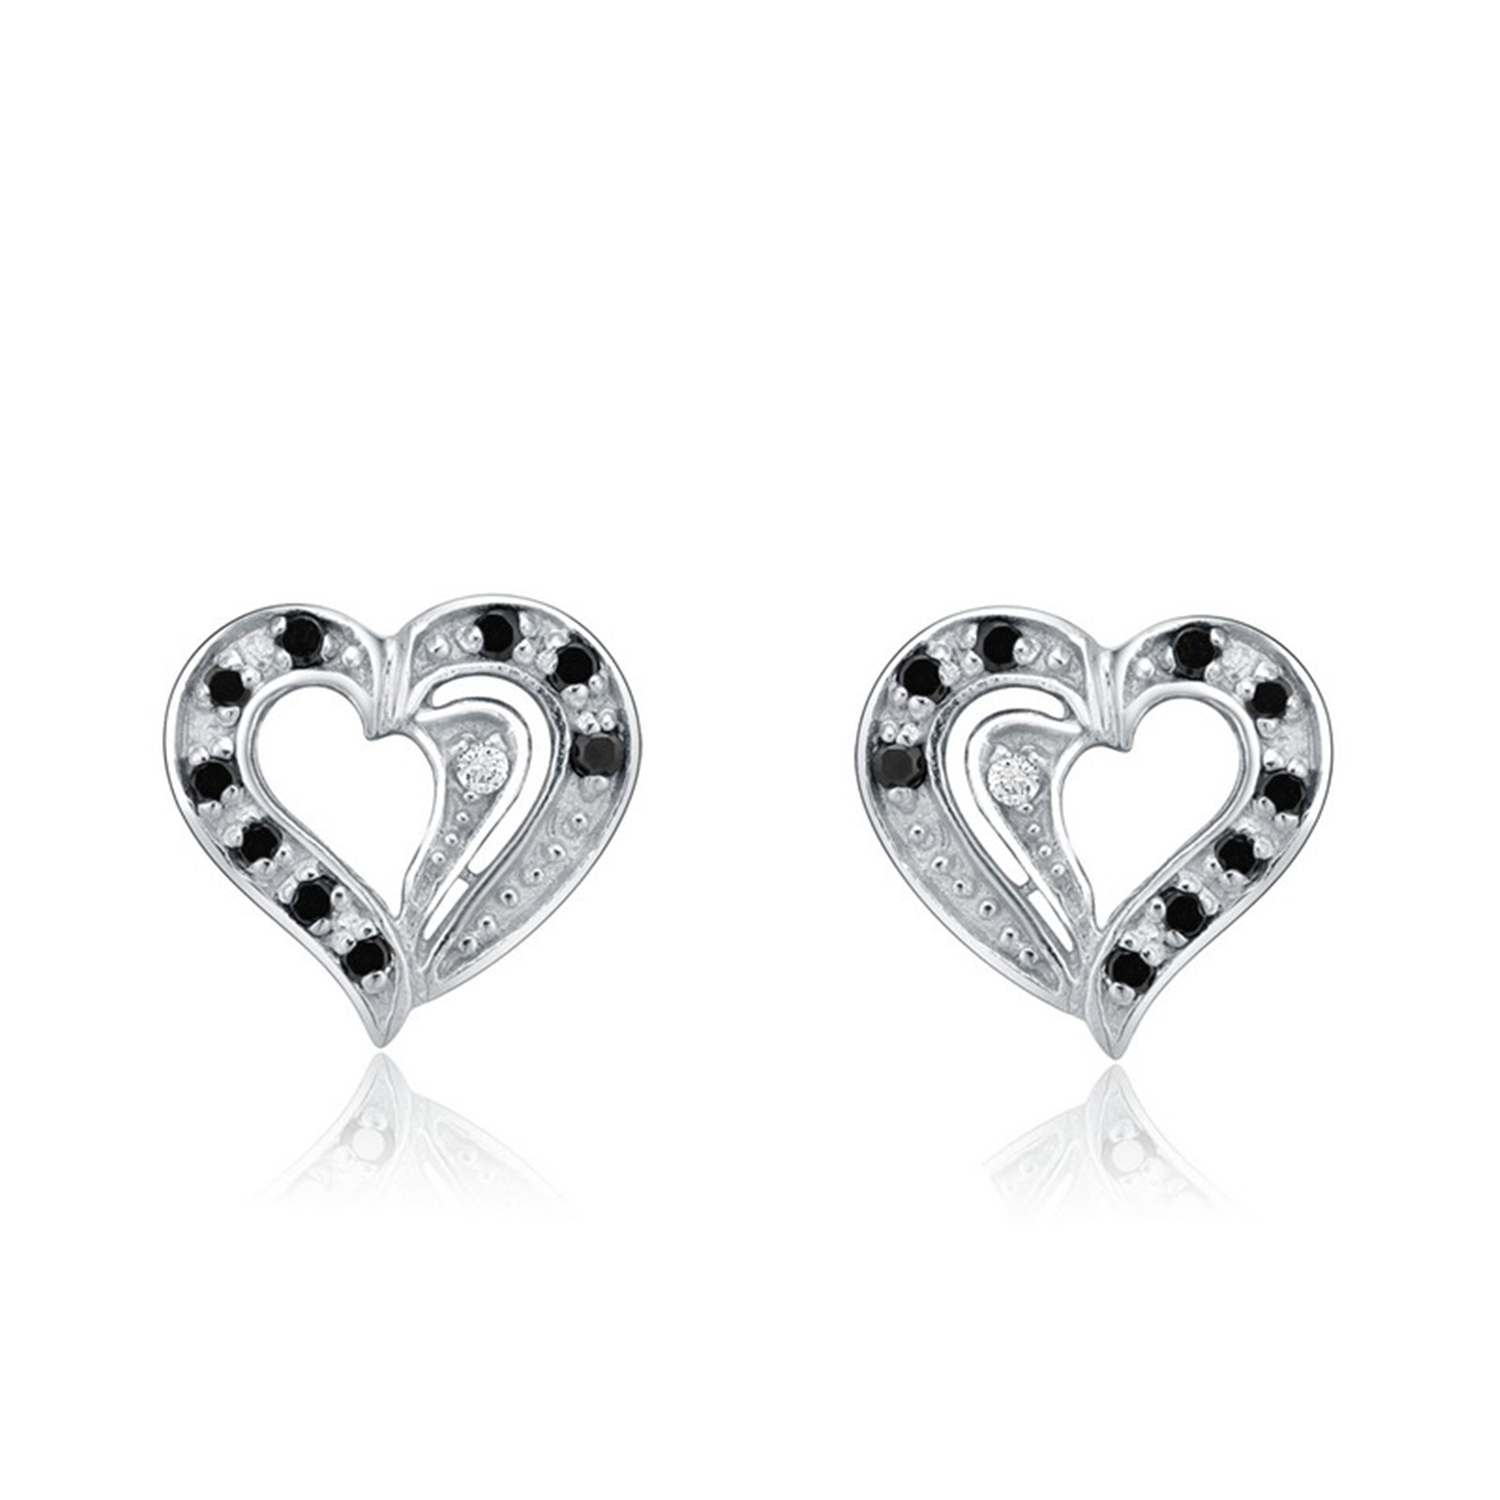 Fashionable Trendy 925 Sterling Silver Heart Shape White And Black CZ Stud Earrings(图2)